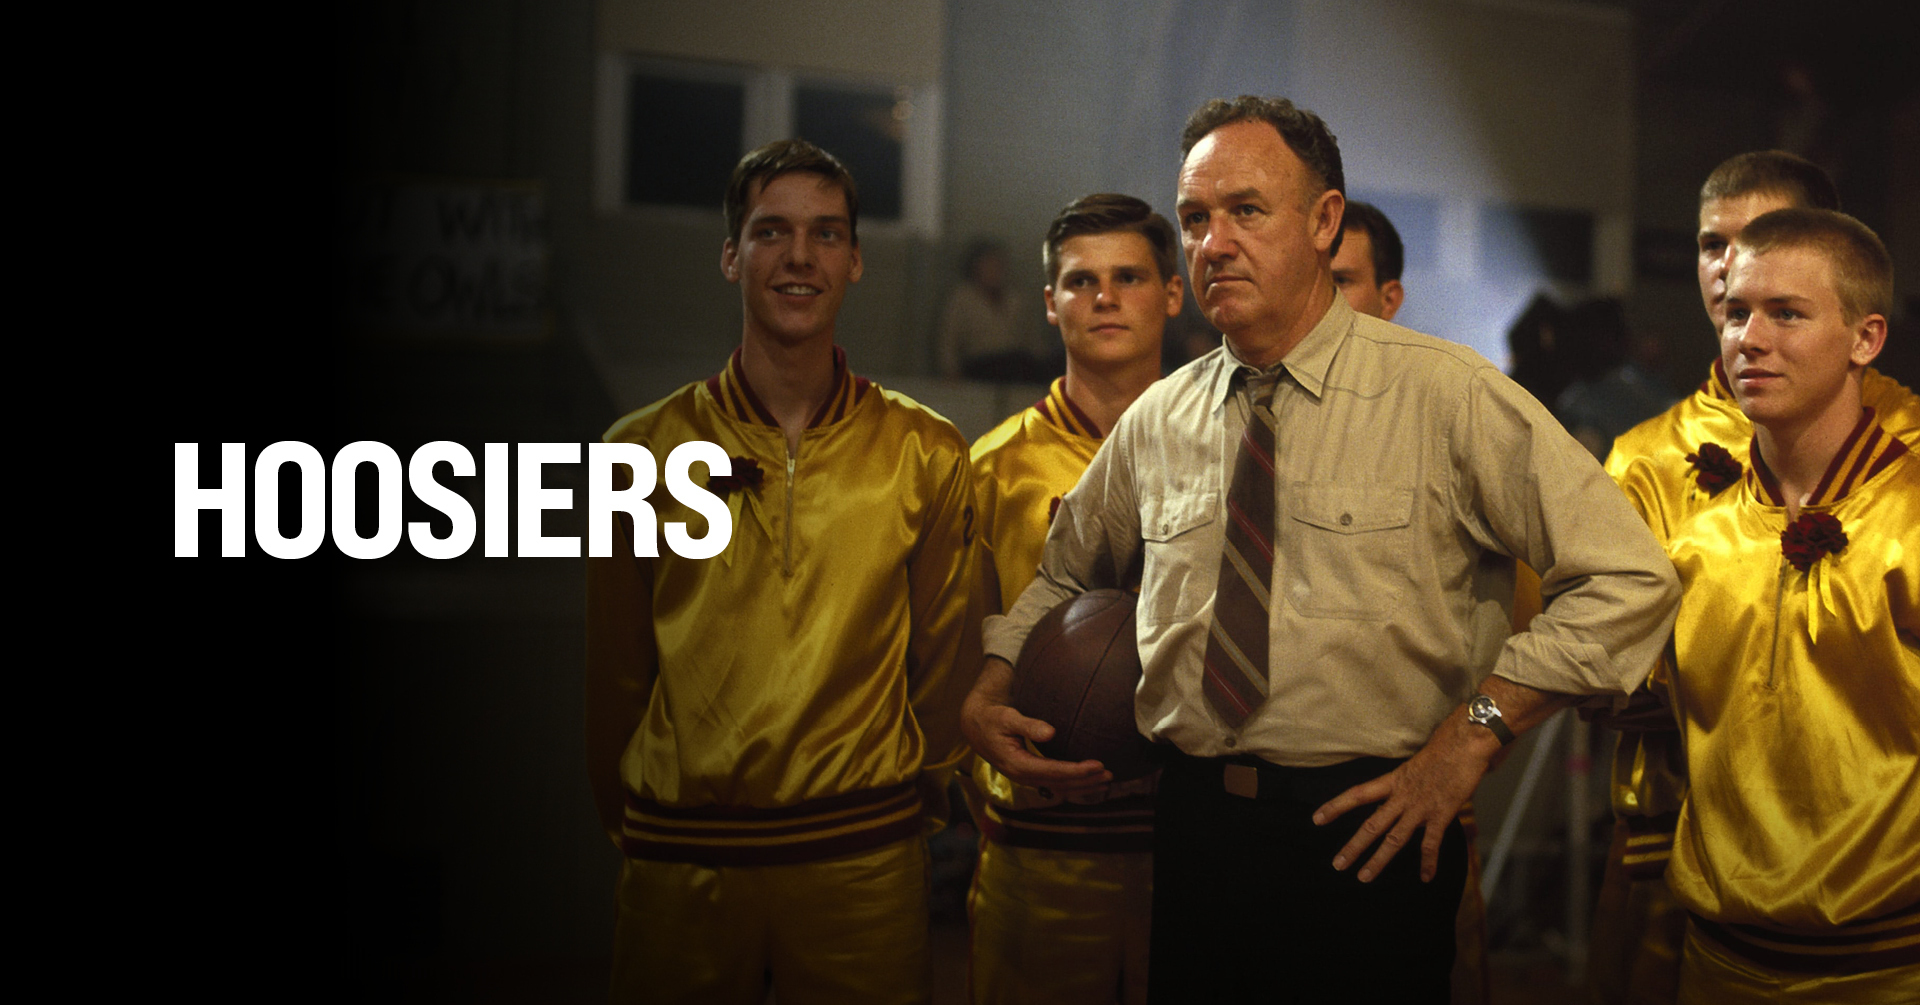 34-facts-about-the-movie-hoosiers